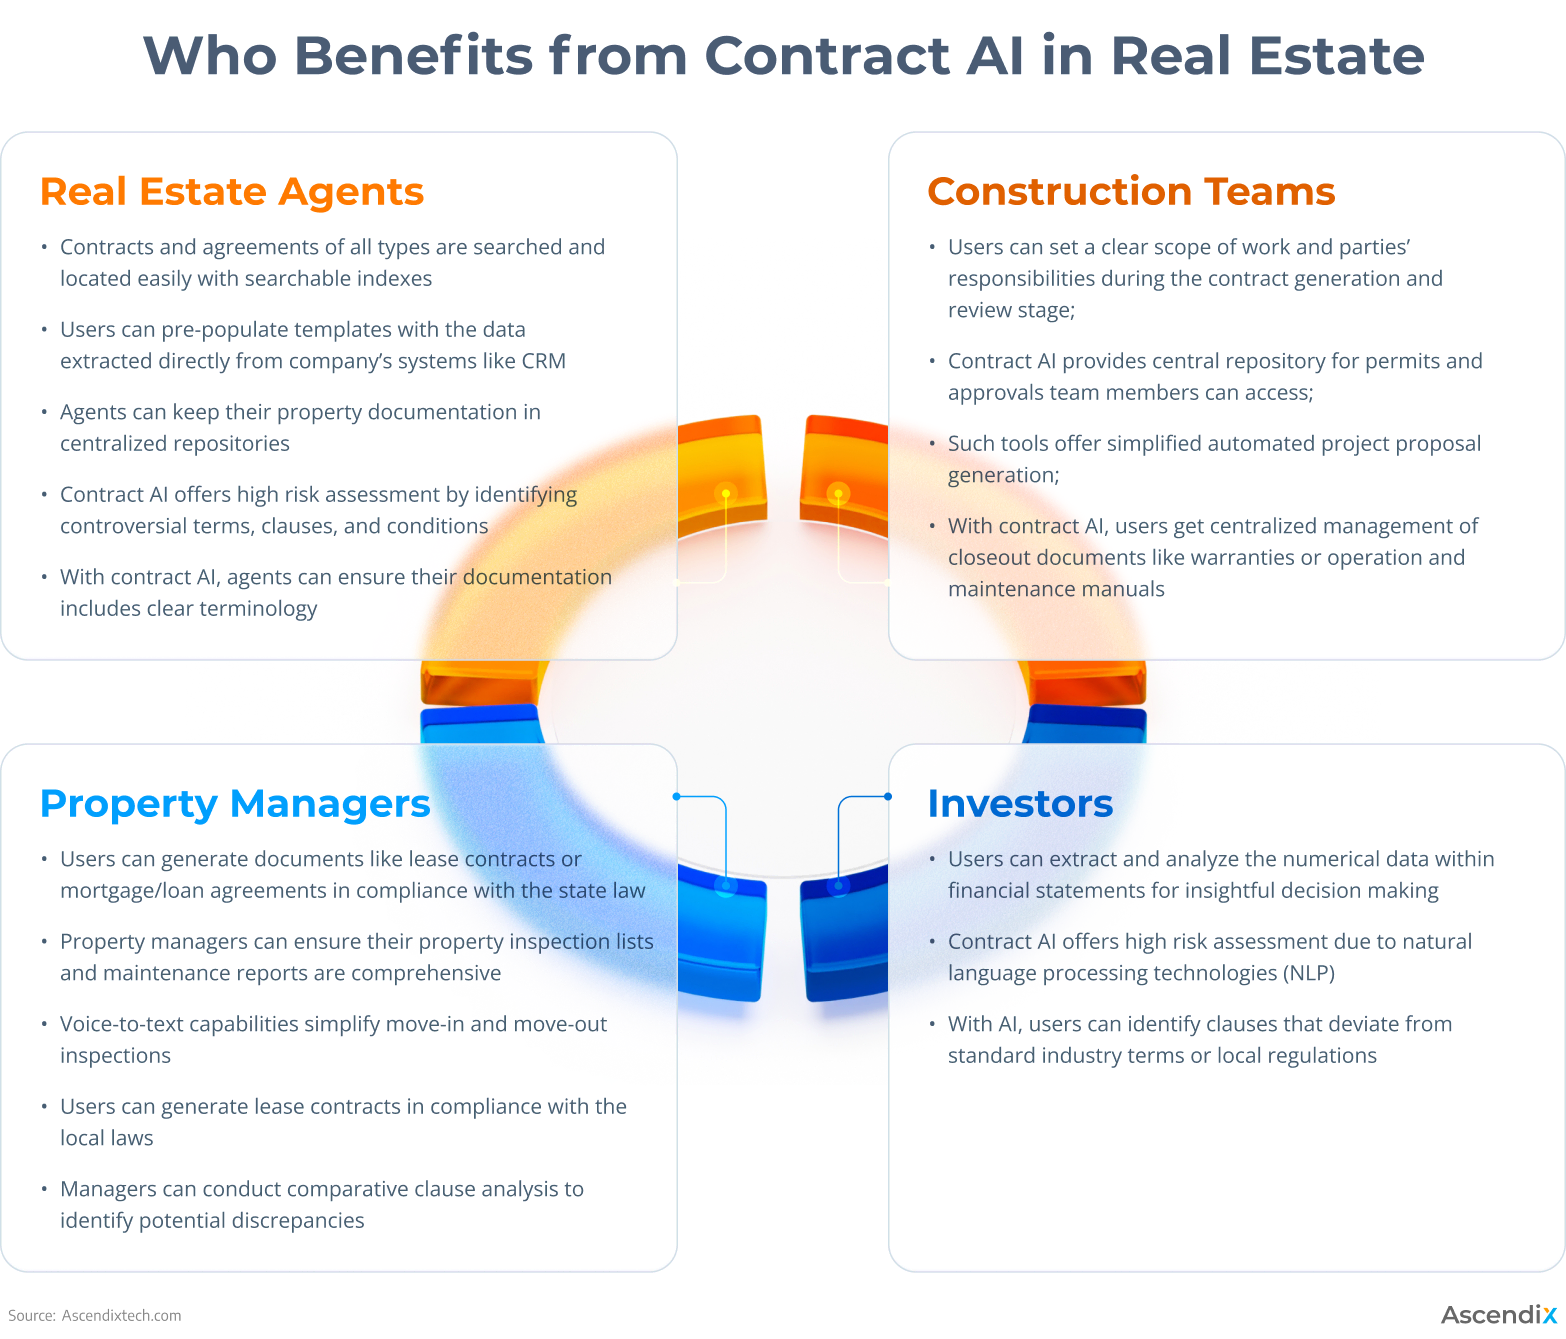 01_Who Benefits from Contract AI in Real Estate